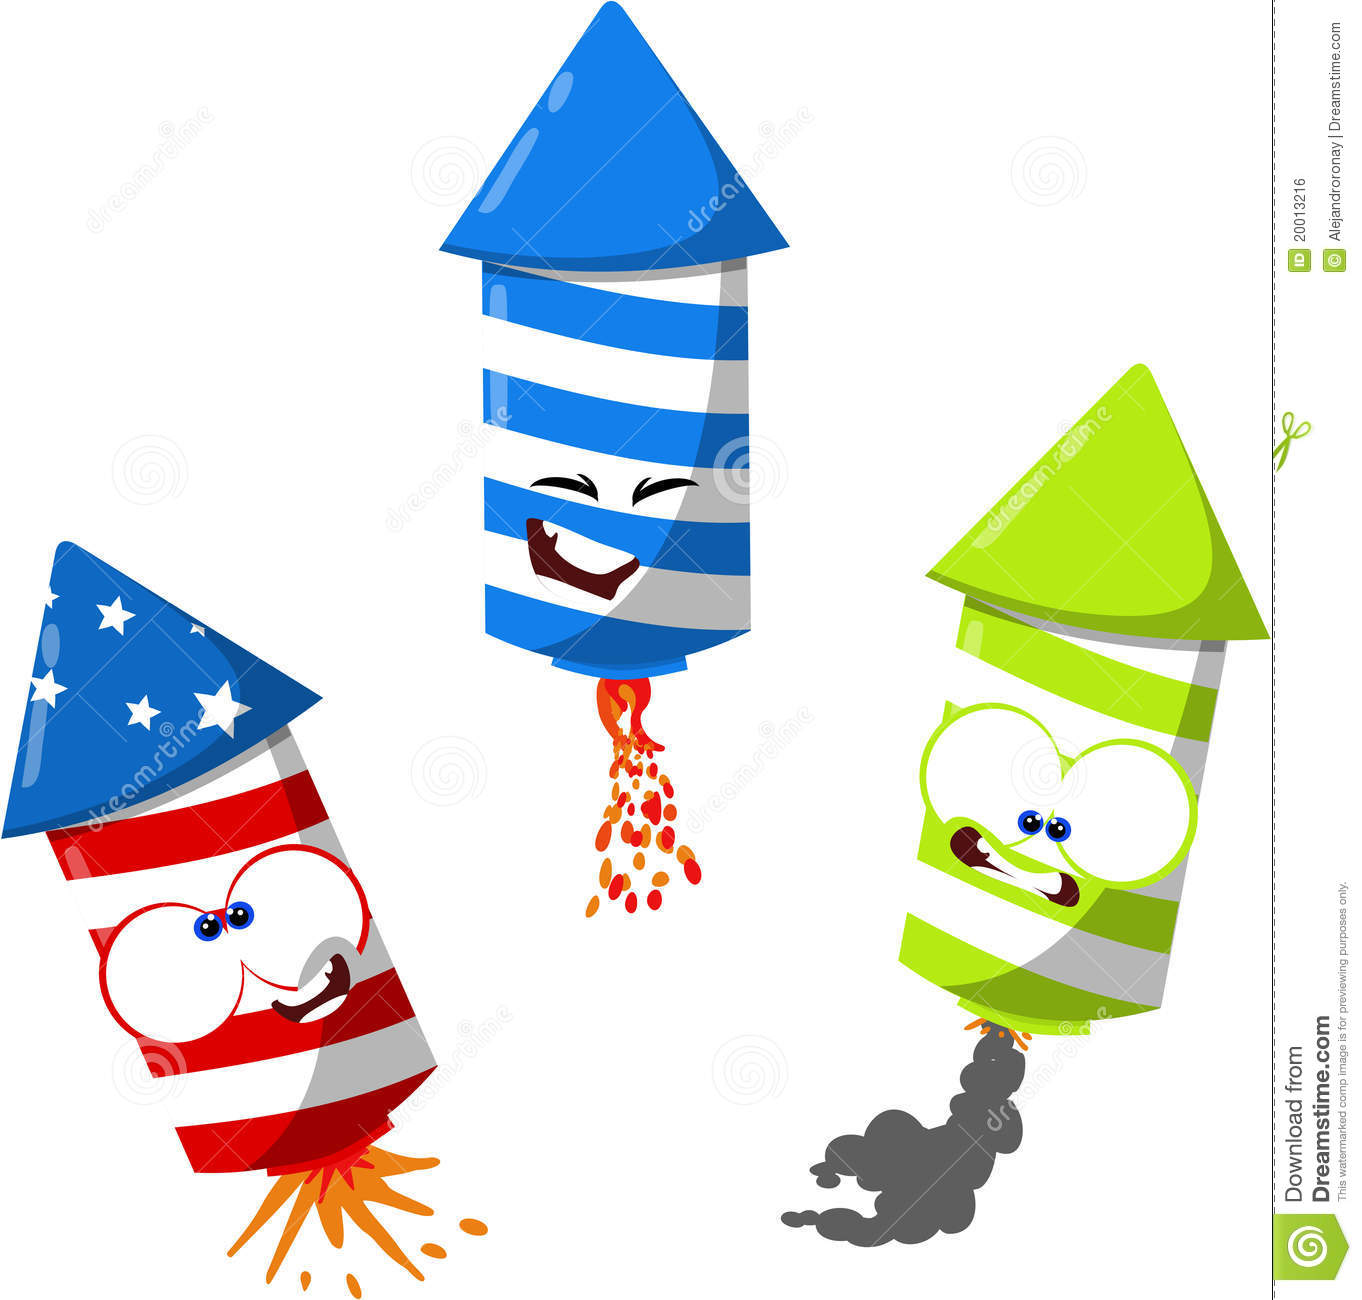 Cute 4th Of July Fireworks Royalty Free Stock Image   Image  20013216